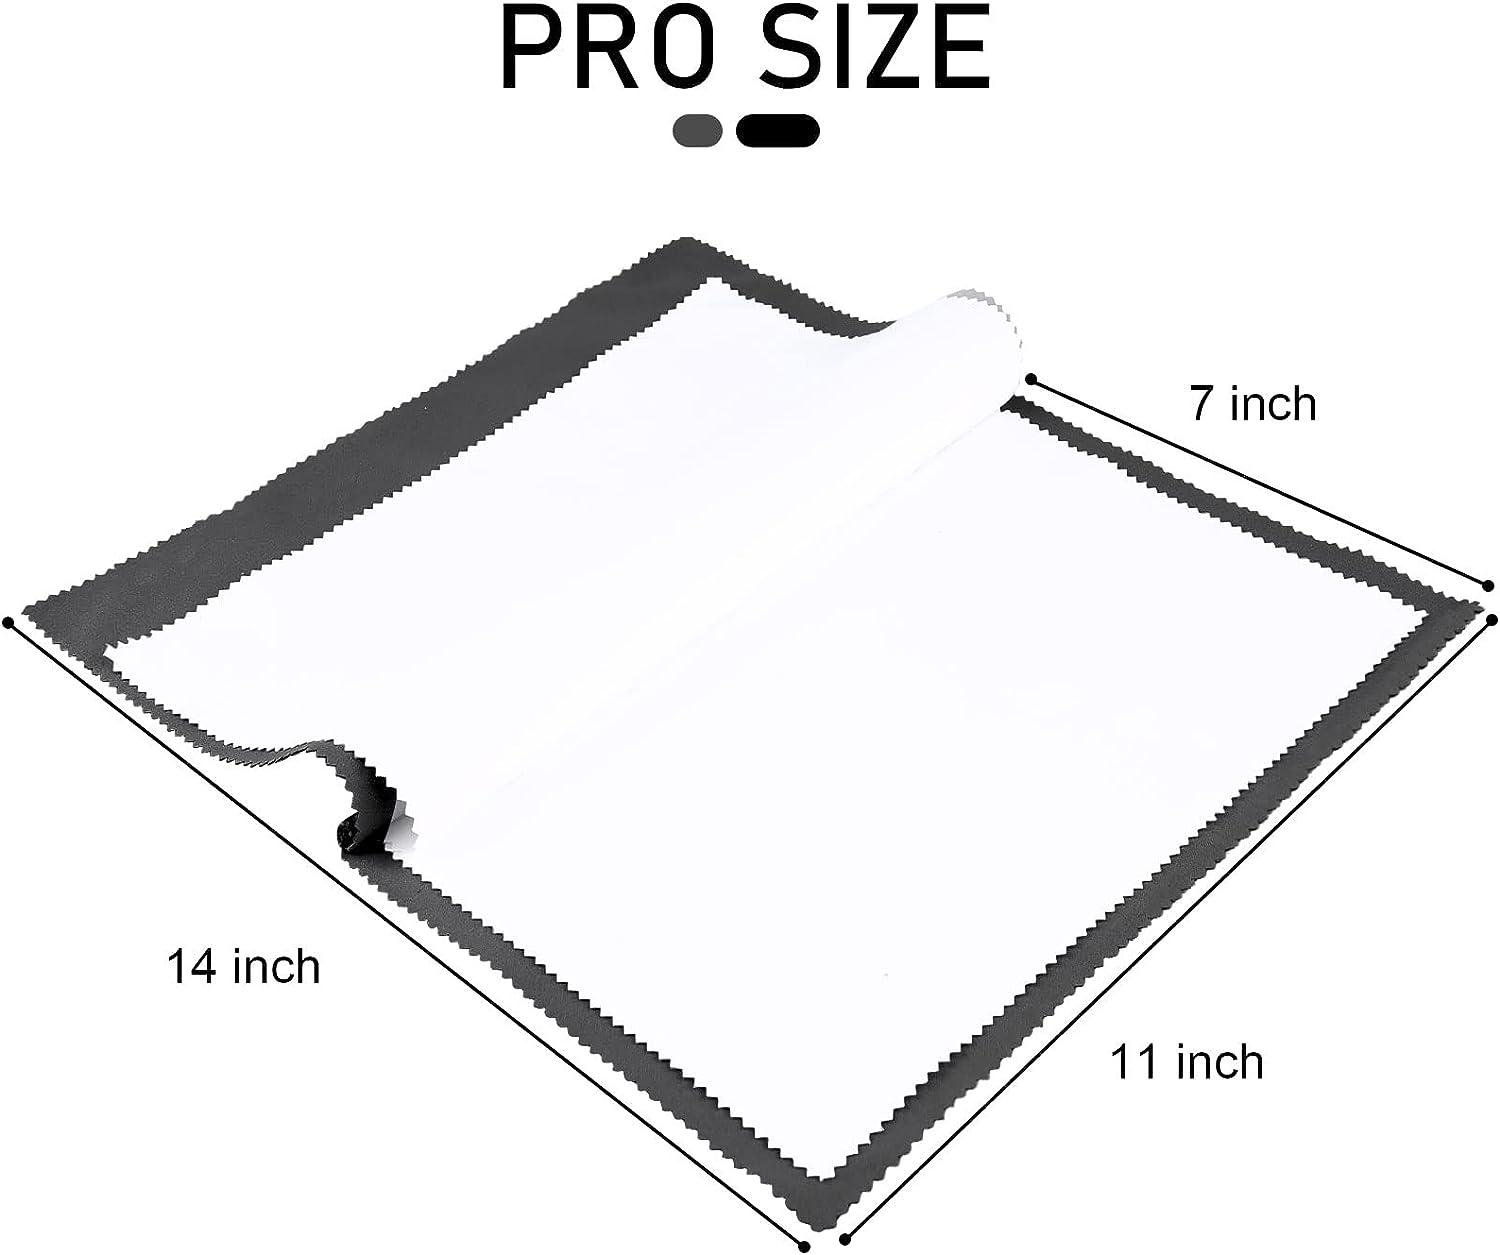 Pro Size Polishing Cloth 11 x 14 inches for Silver, Gold and